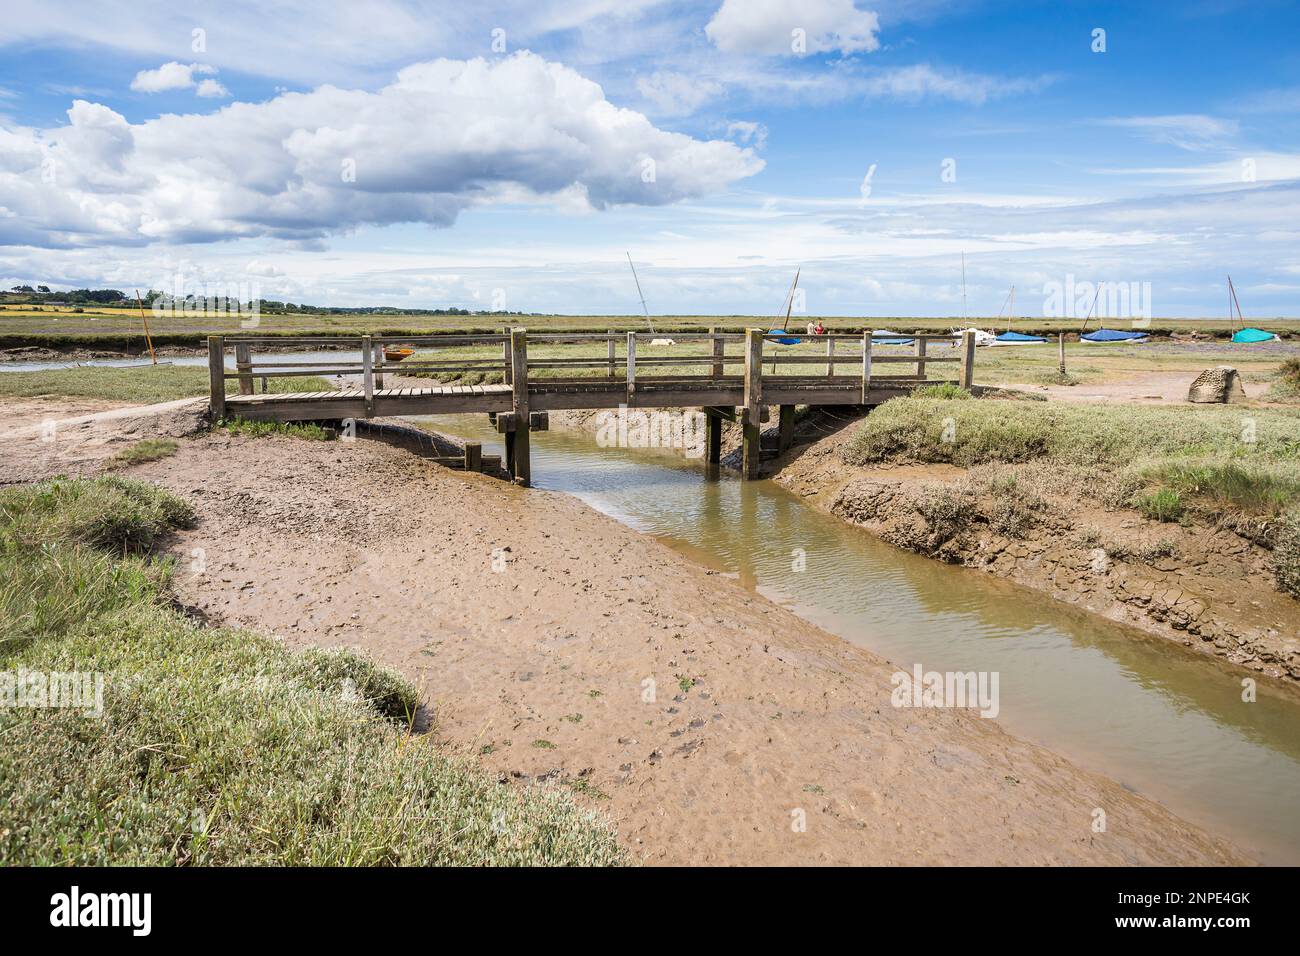 A wooden bridge spans a channel of water at low tide at Blakeney on the North Norfolk coast. Stock Photo